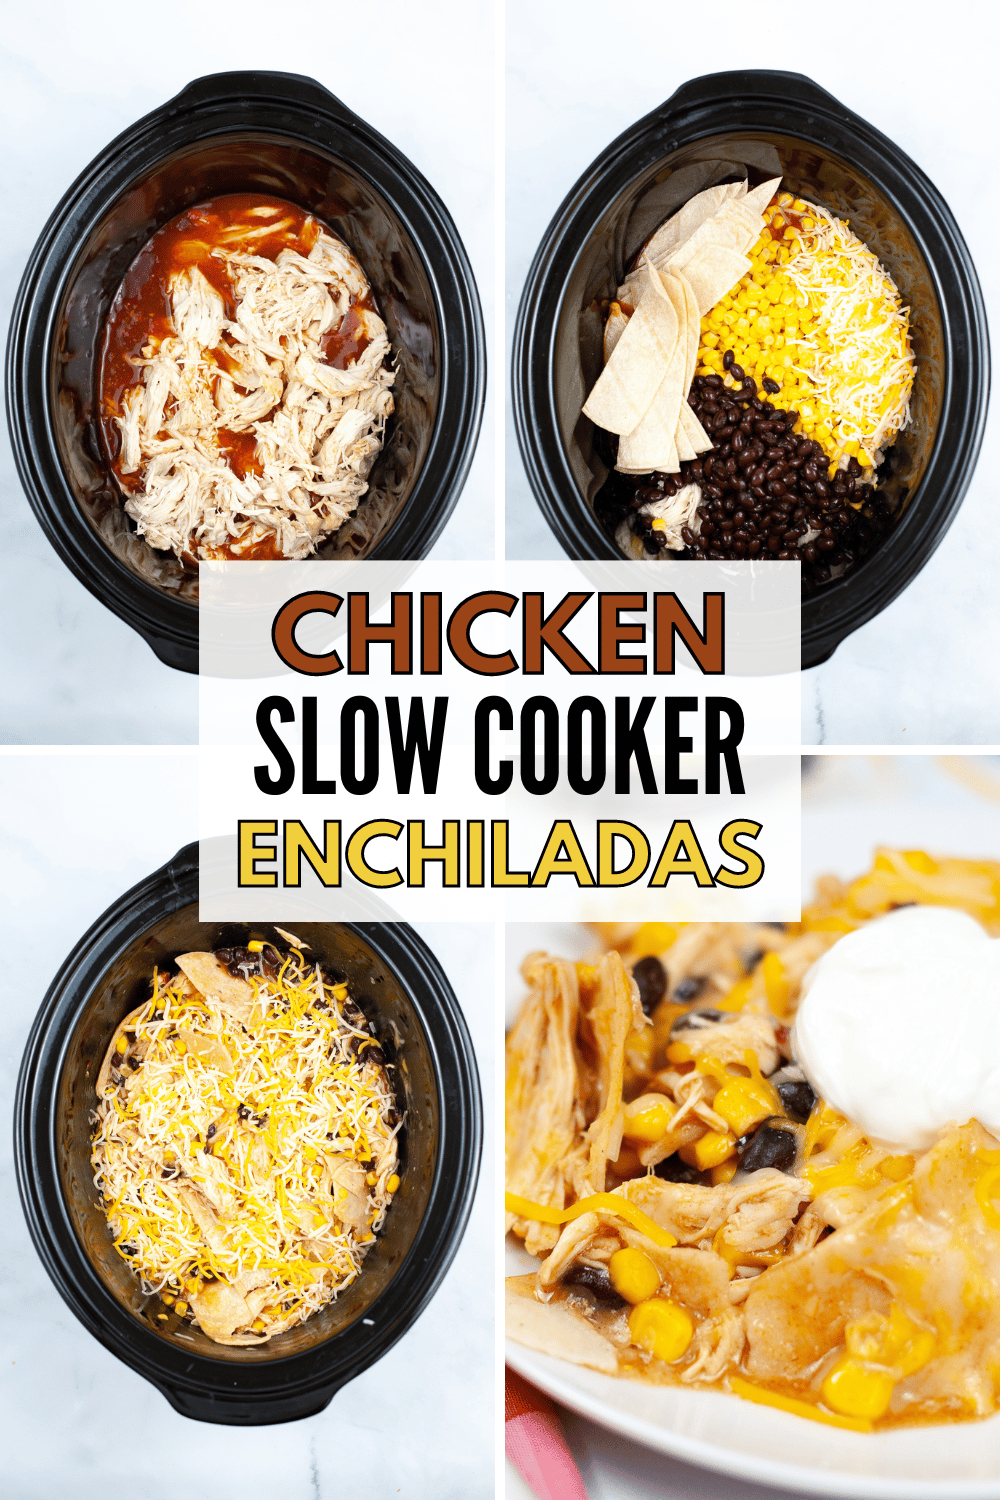 These Chicken Slow Cooker Enchiladas are so easy to make and full of flavor! This recipe is perfect for busy weeknights! #chickenenchiladas #slowcooker #chicken #recipe via @wondermomwannab